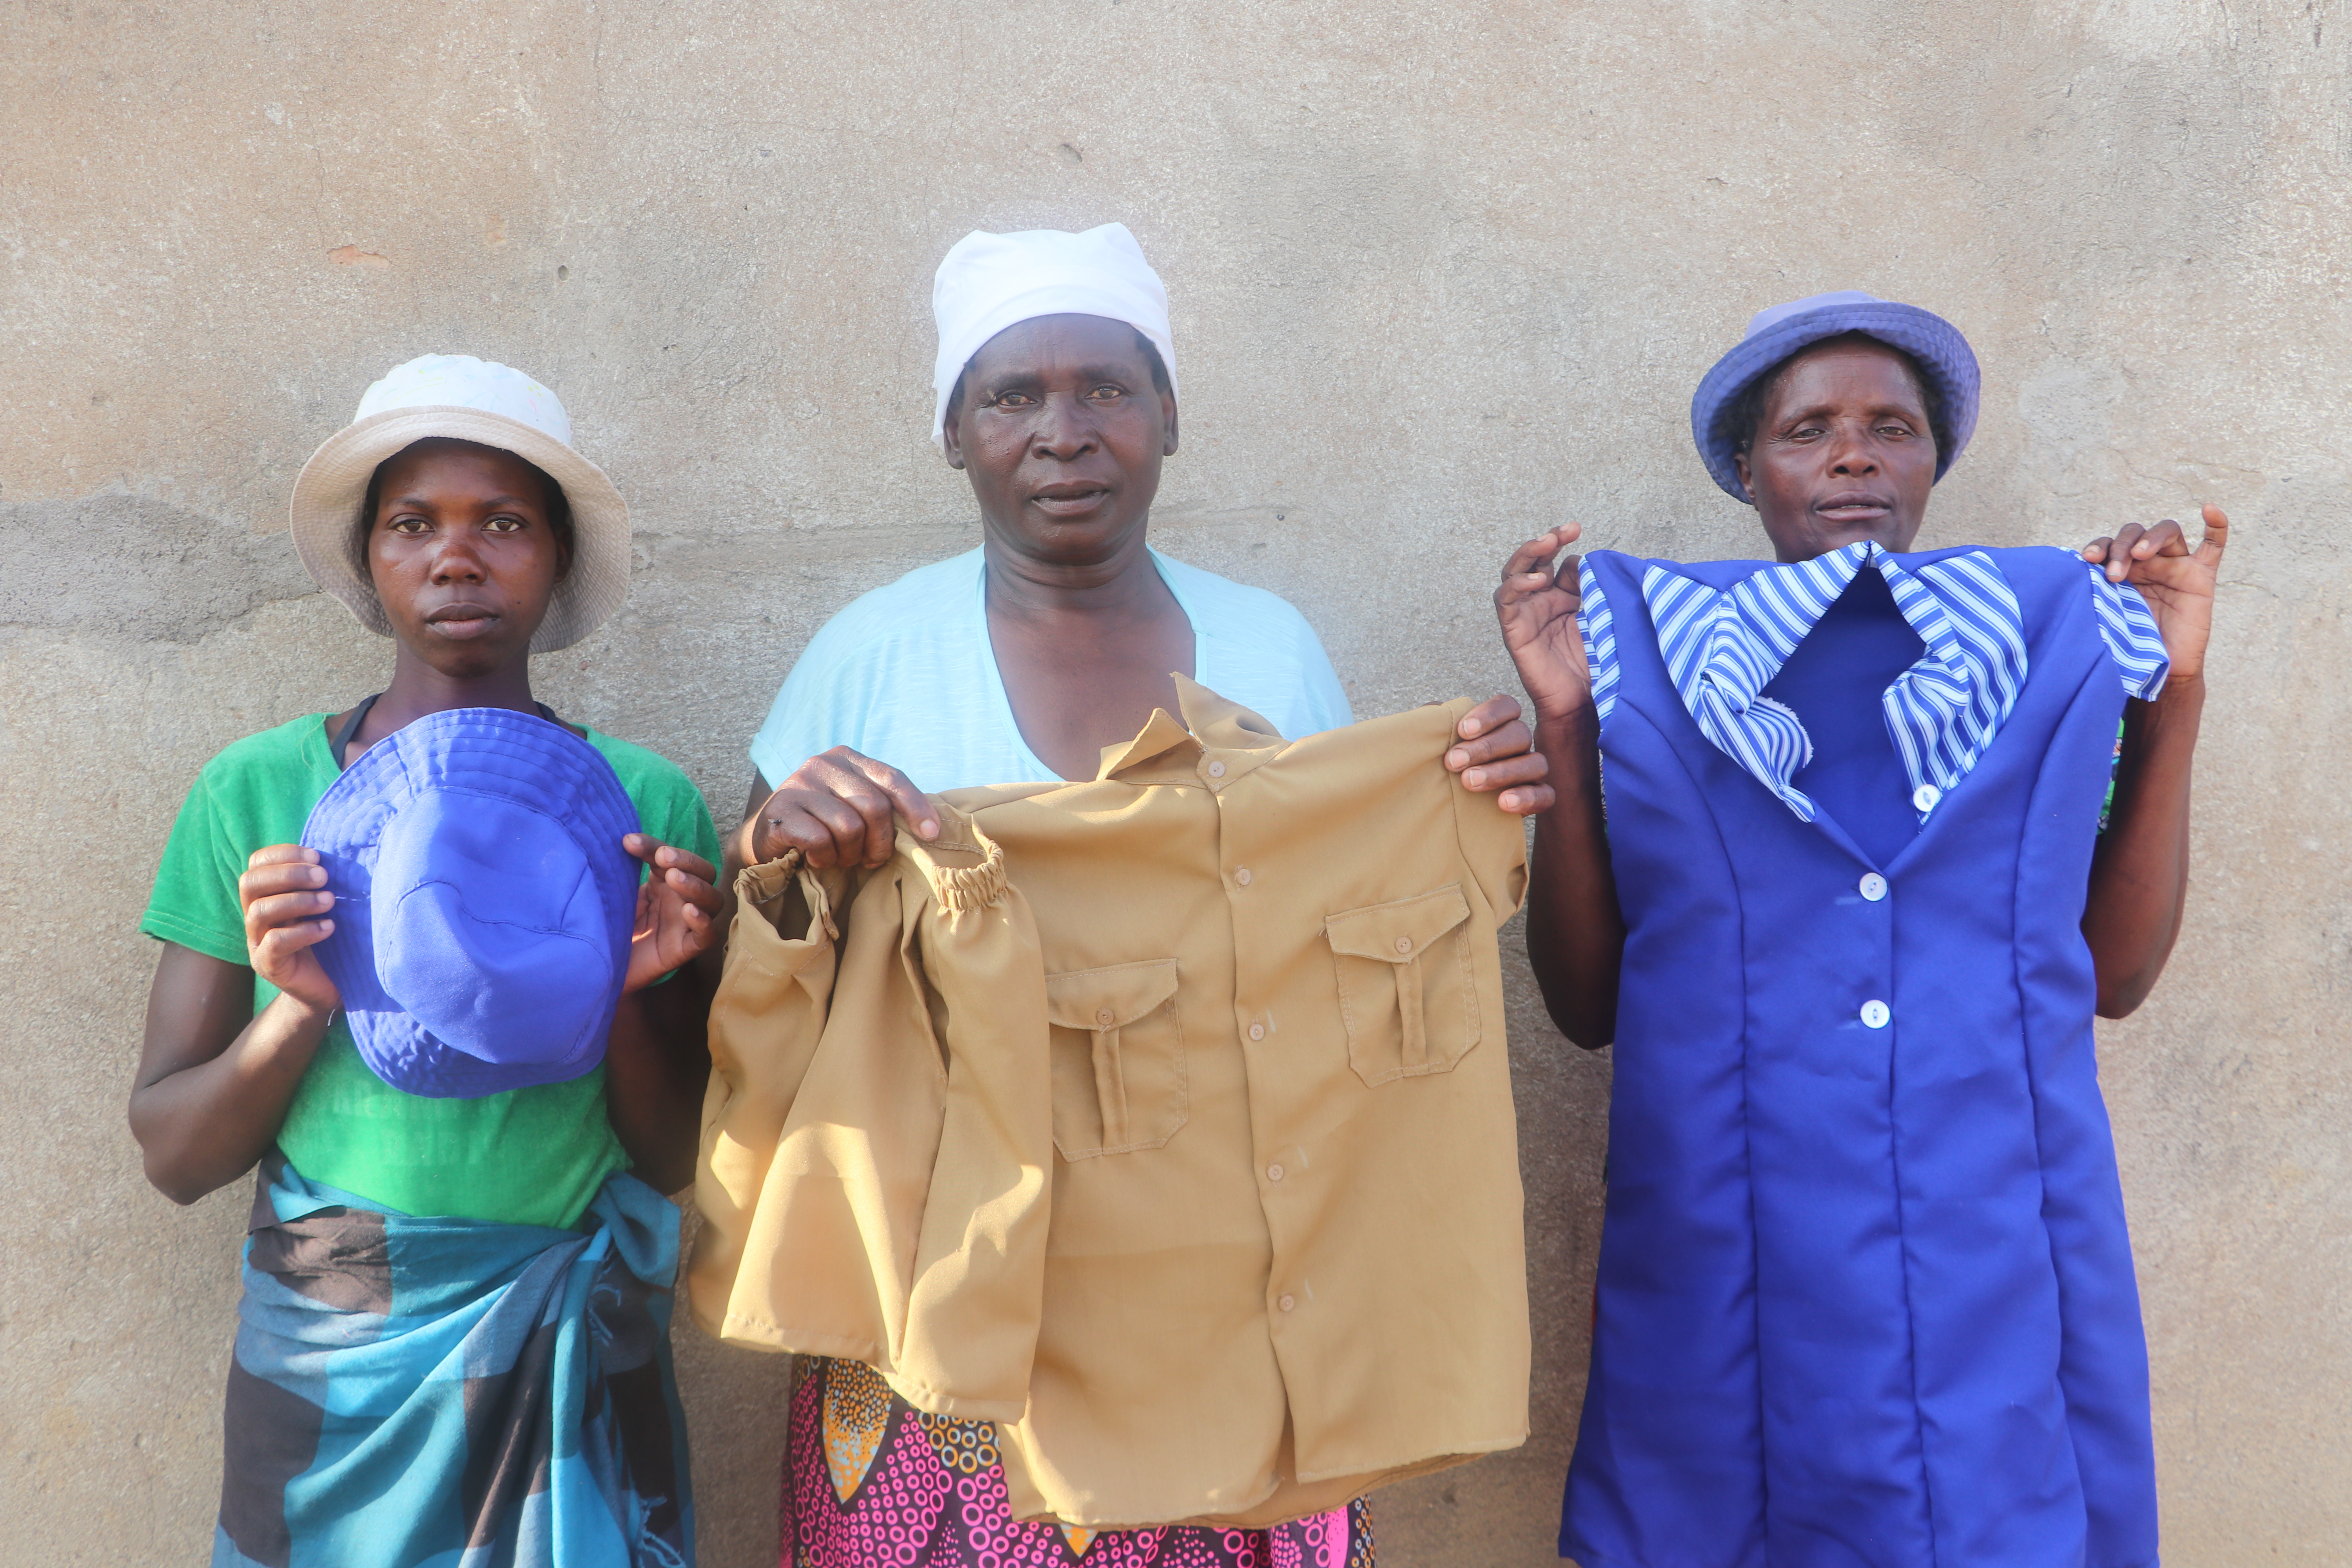 Tendaiishe Group Members holding some of the uniforms they make for children